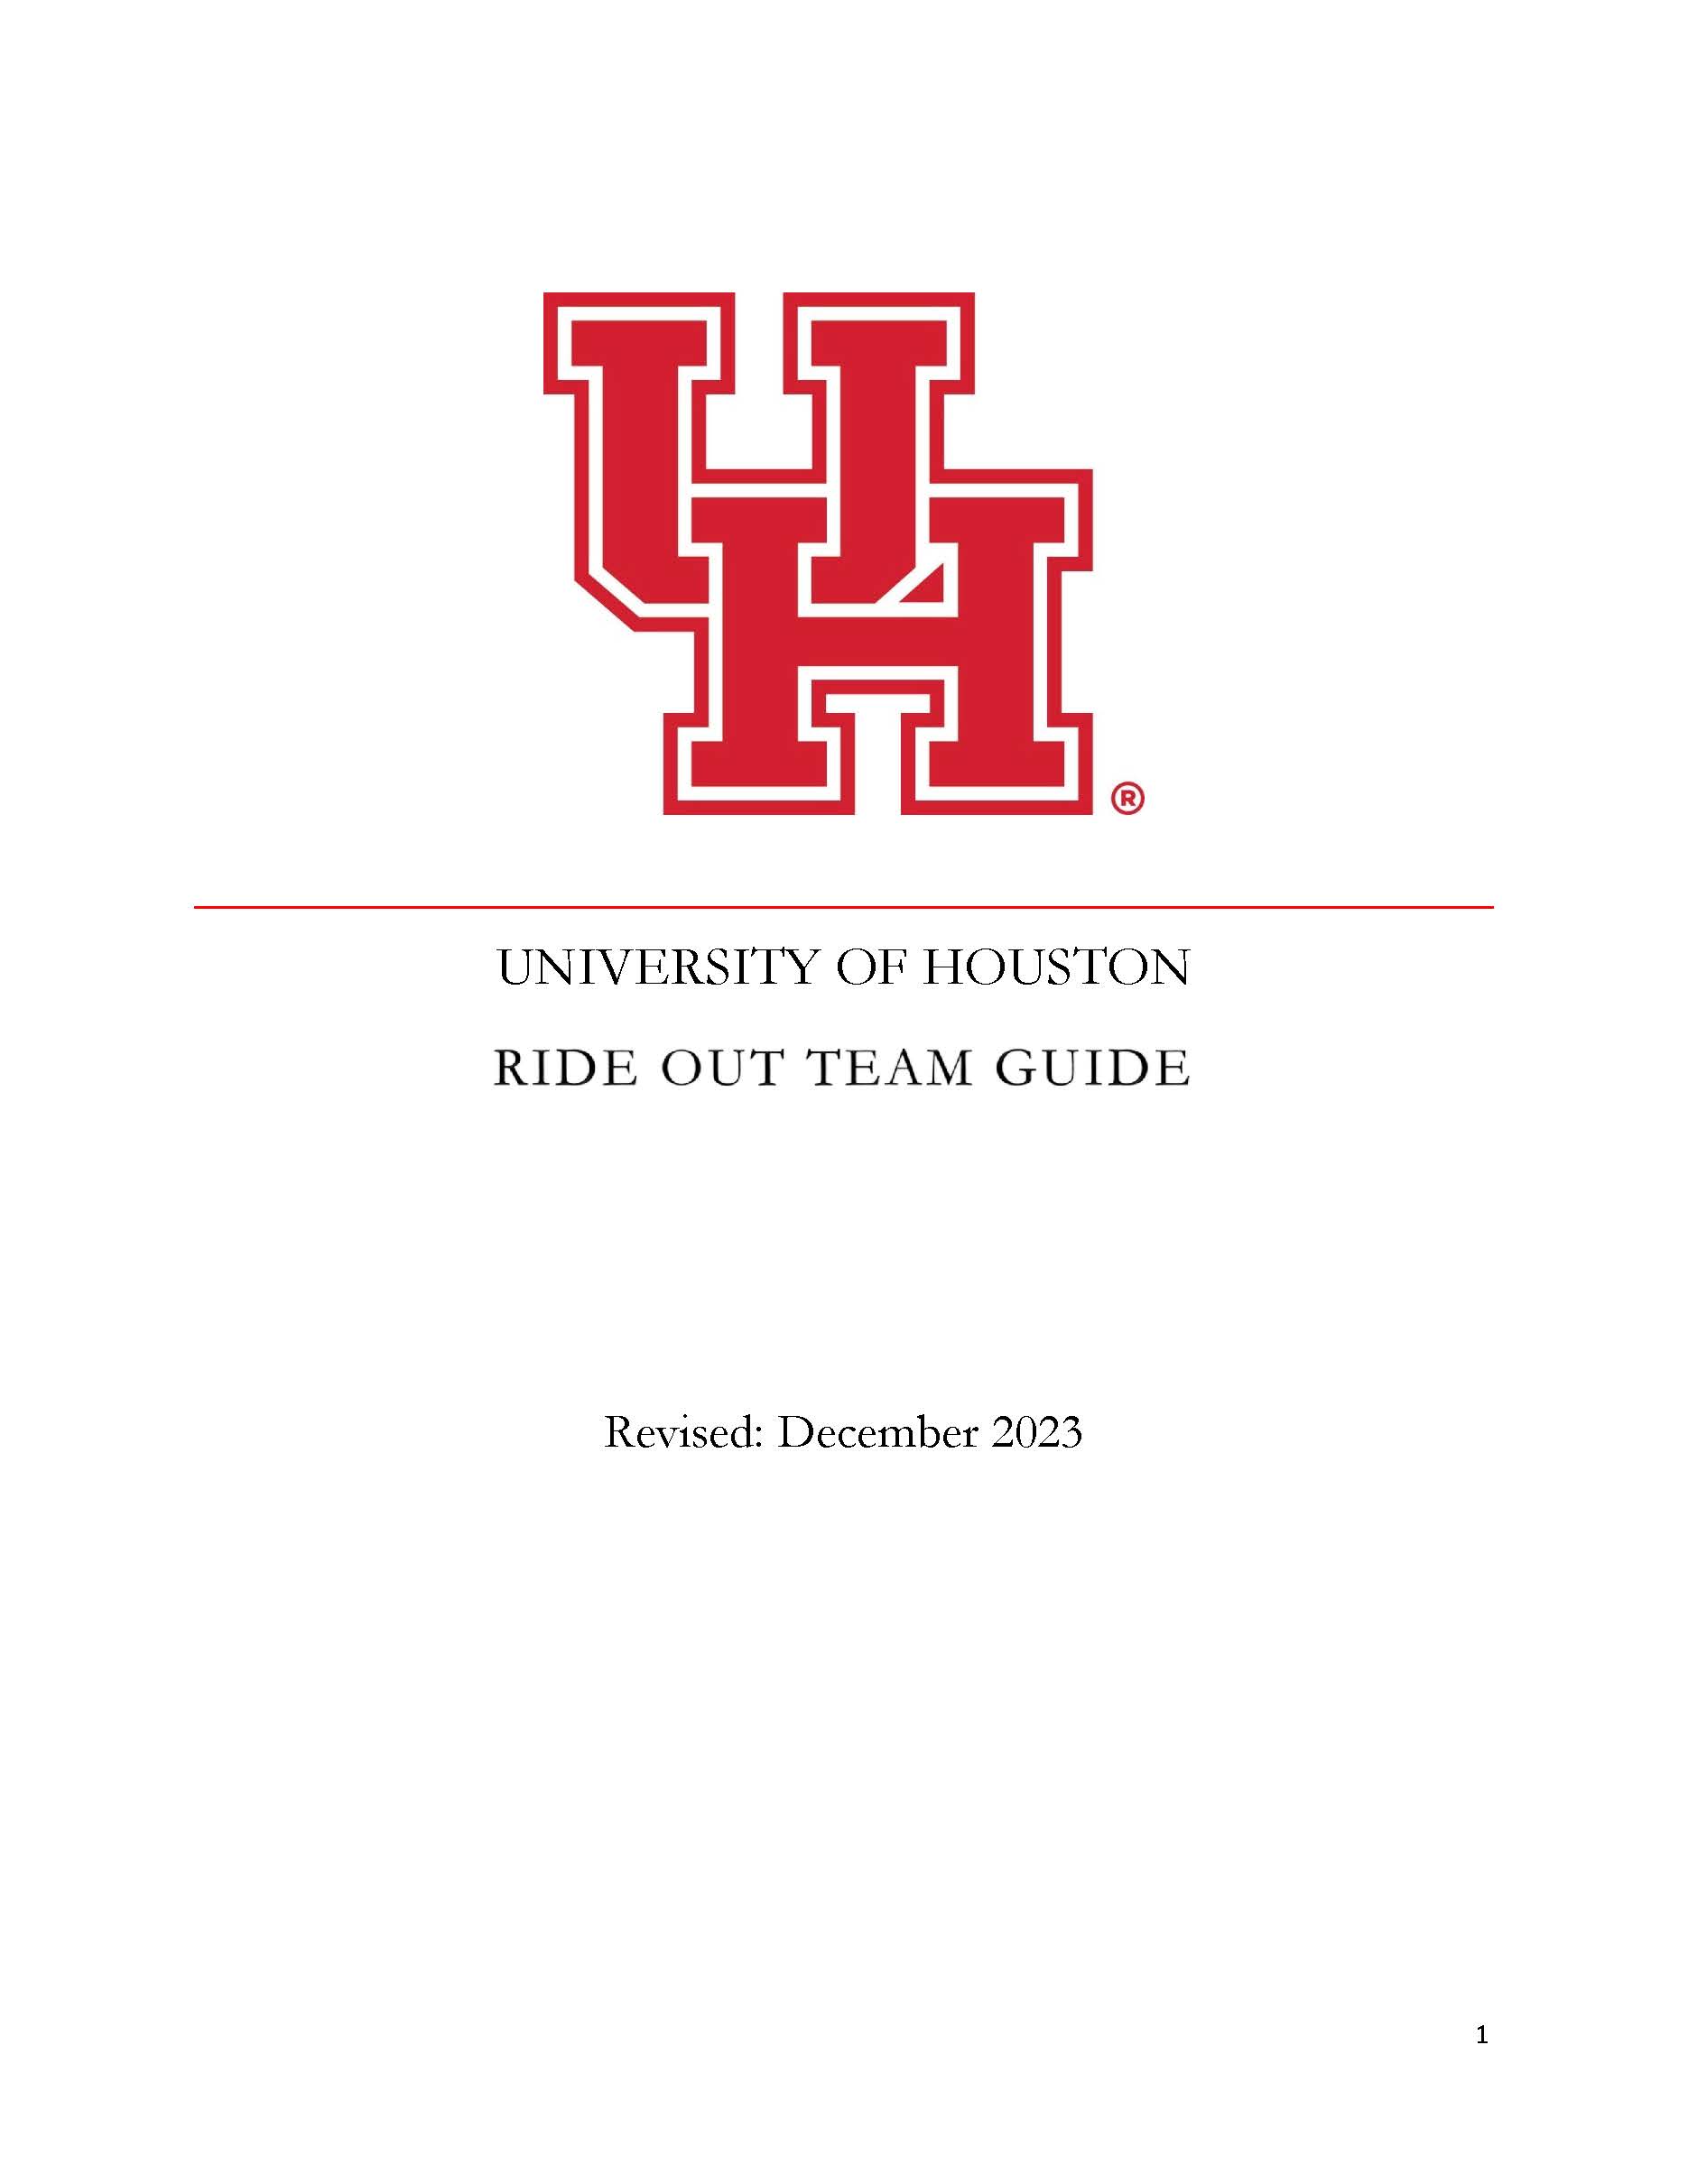 ride-out-guide-2023-final.jpg